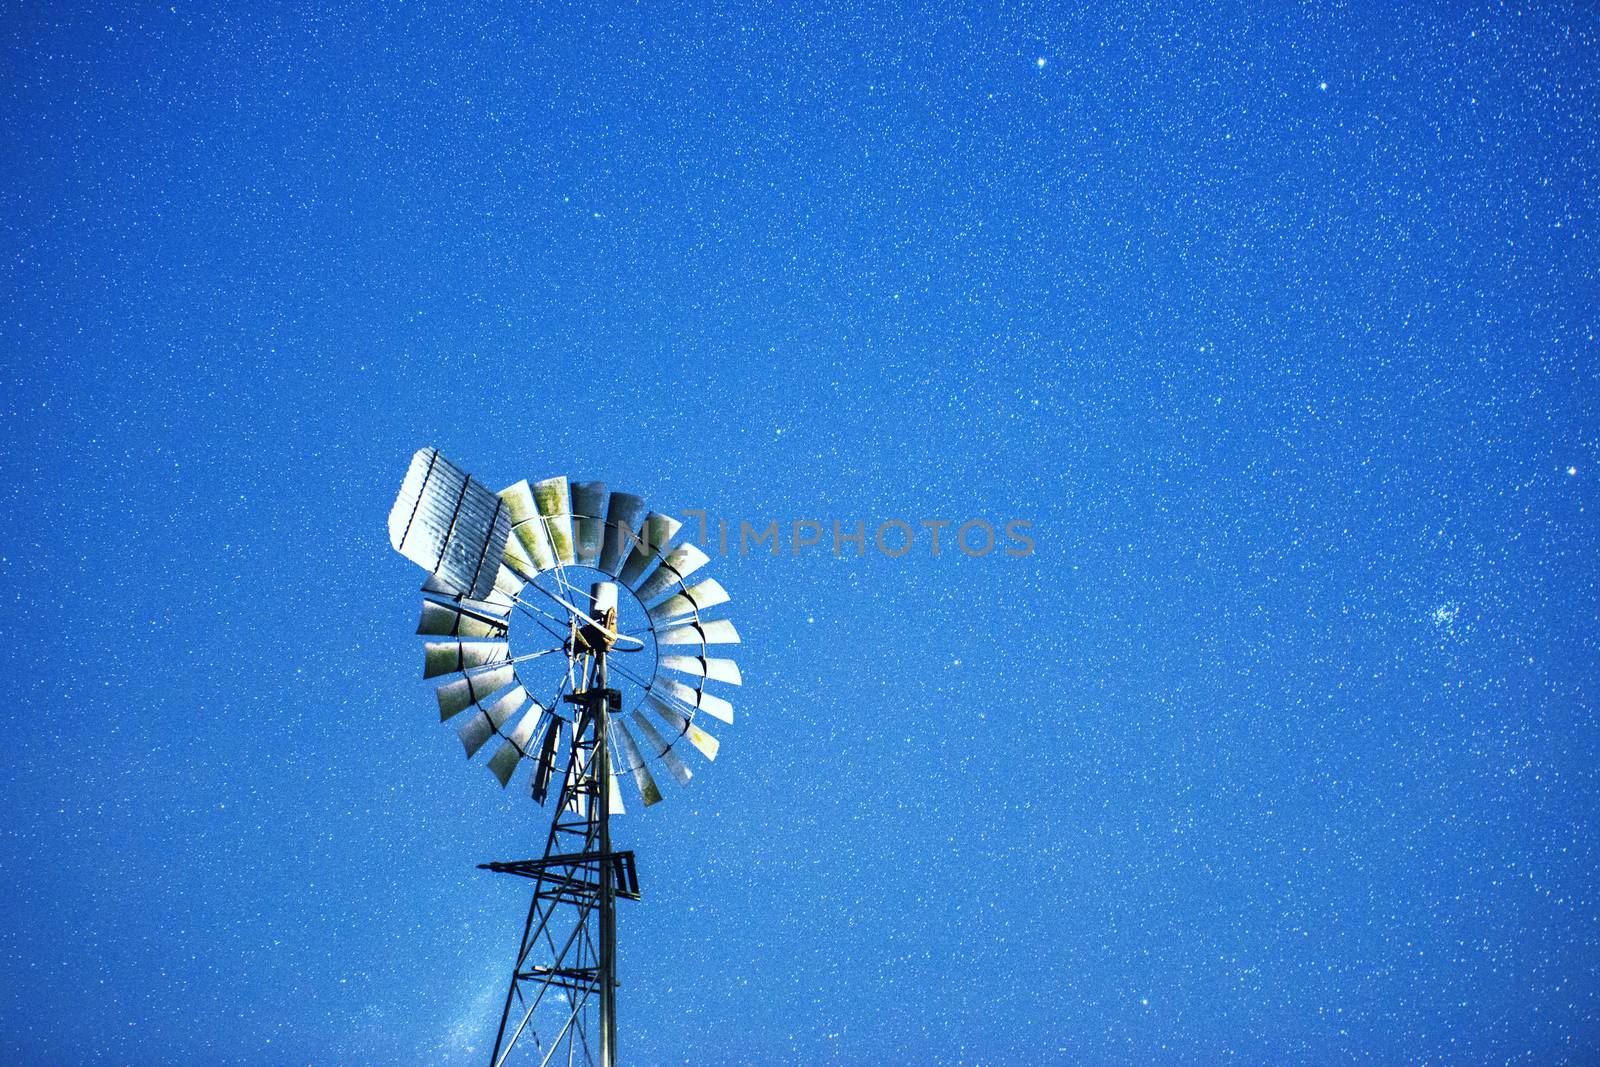 Stars and a windmill at night in the outback of Brisbane, Queensland, Australia.